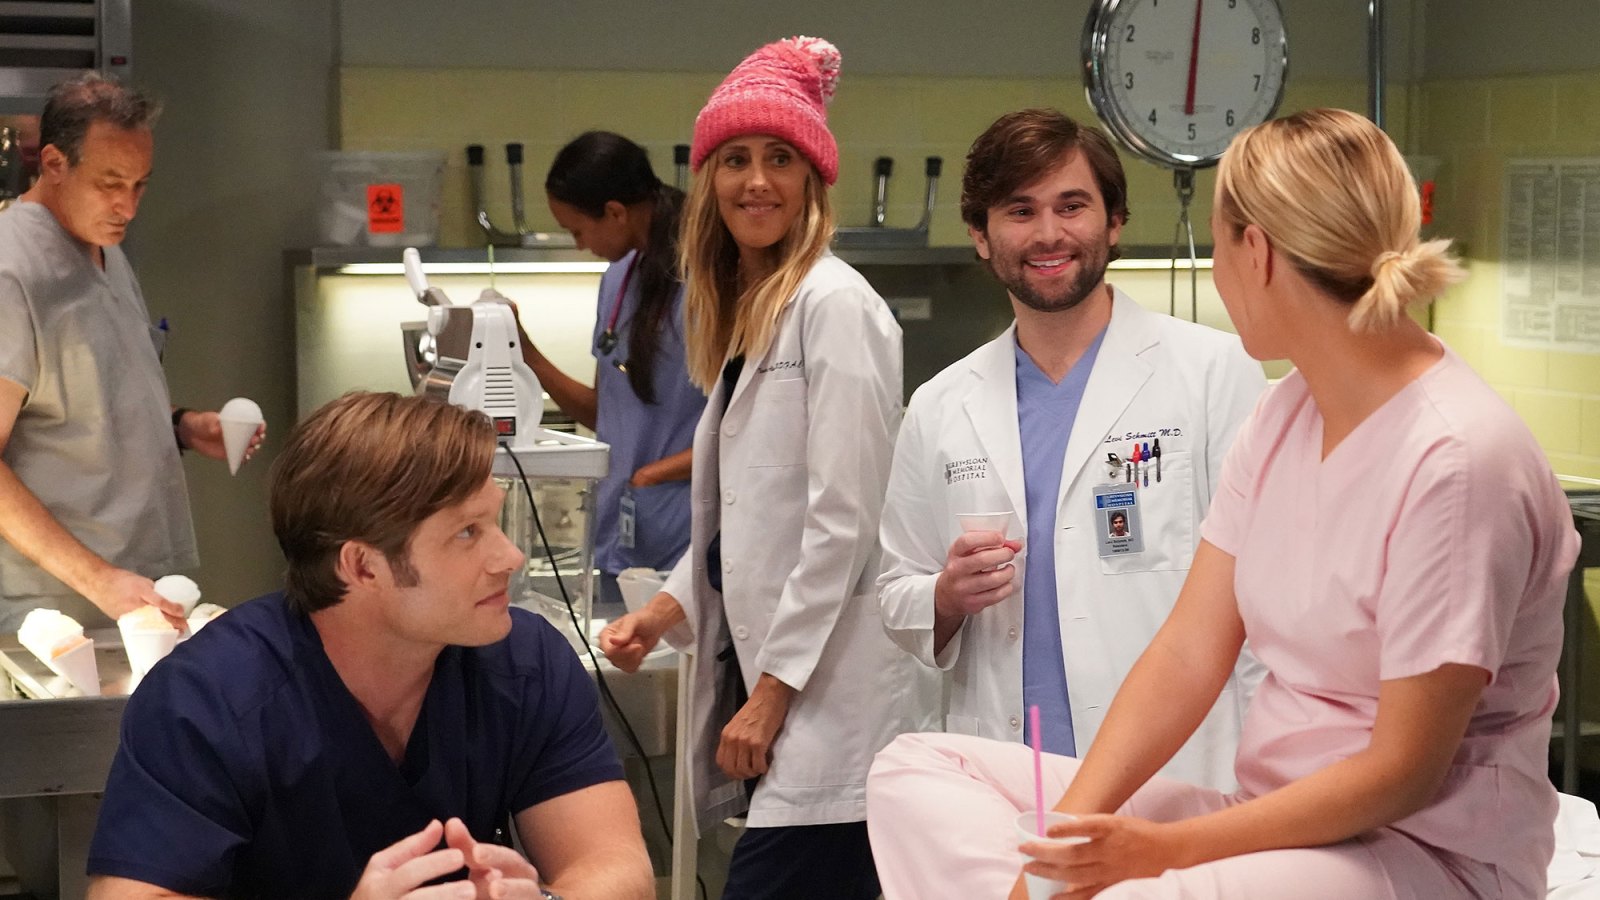 Grey’s Anatomy’ Fans Are Freaking Out Over Which Character Might Get Killed Off Next